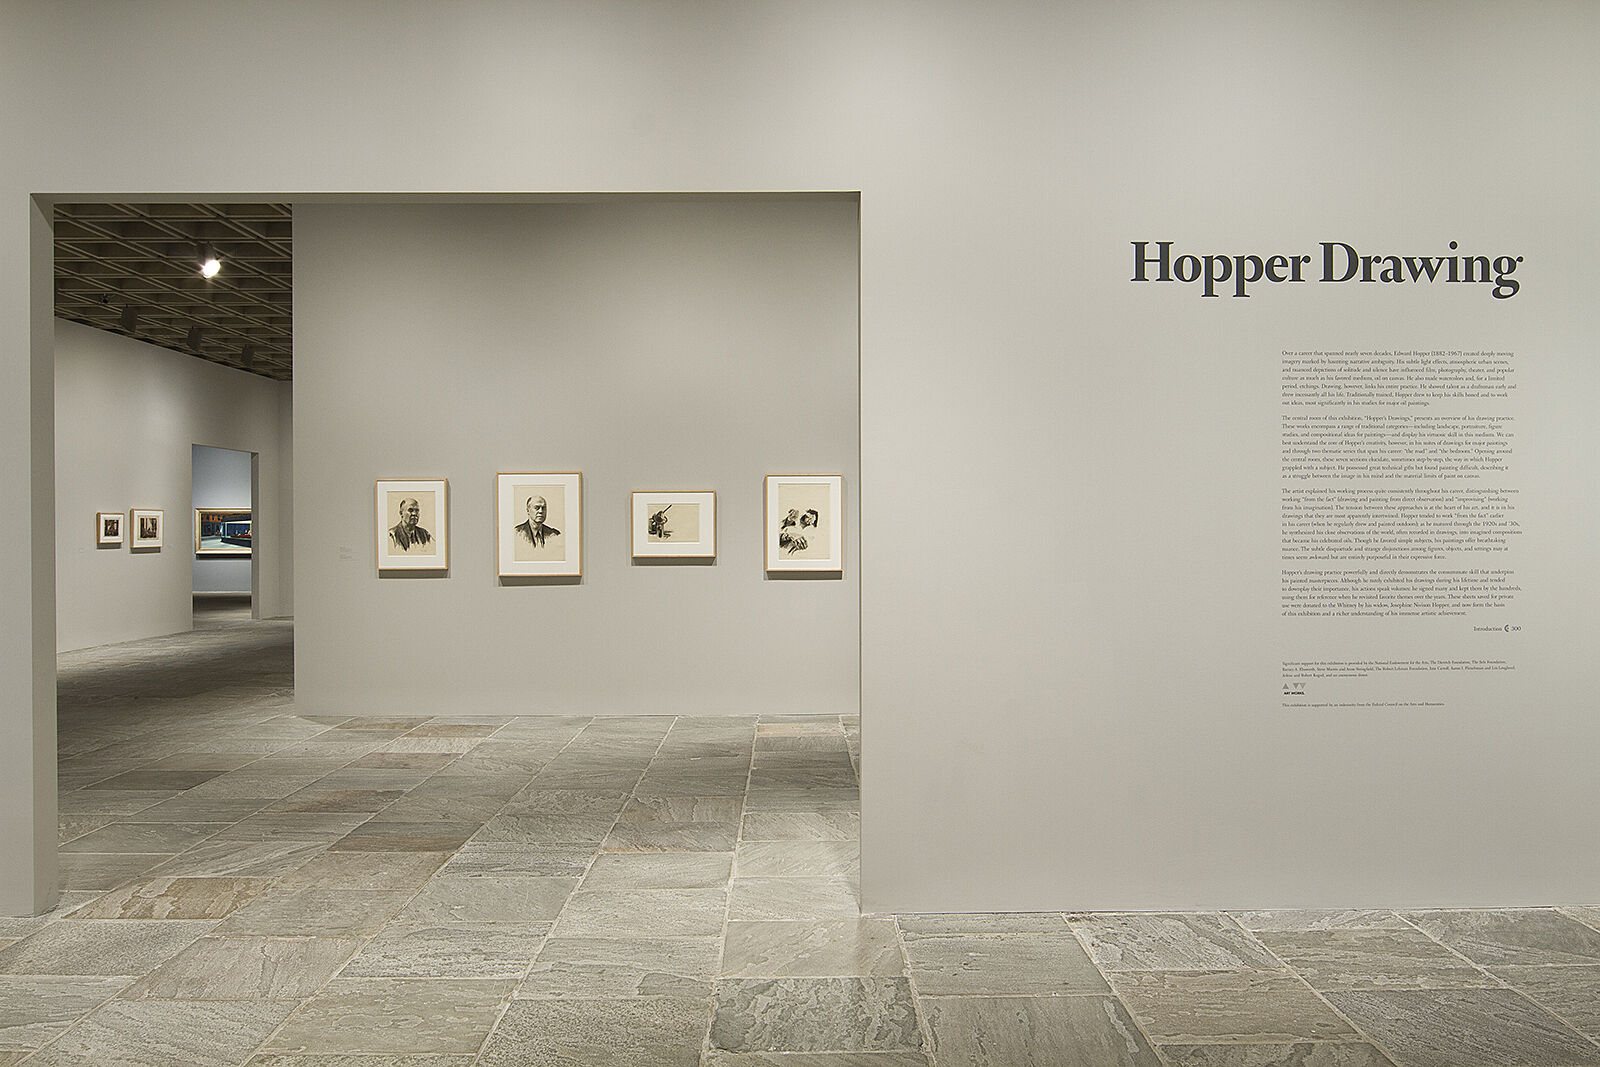 Exhibition entrance of Happer Drawing.